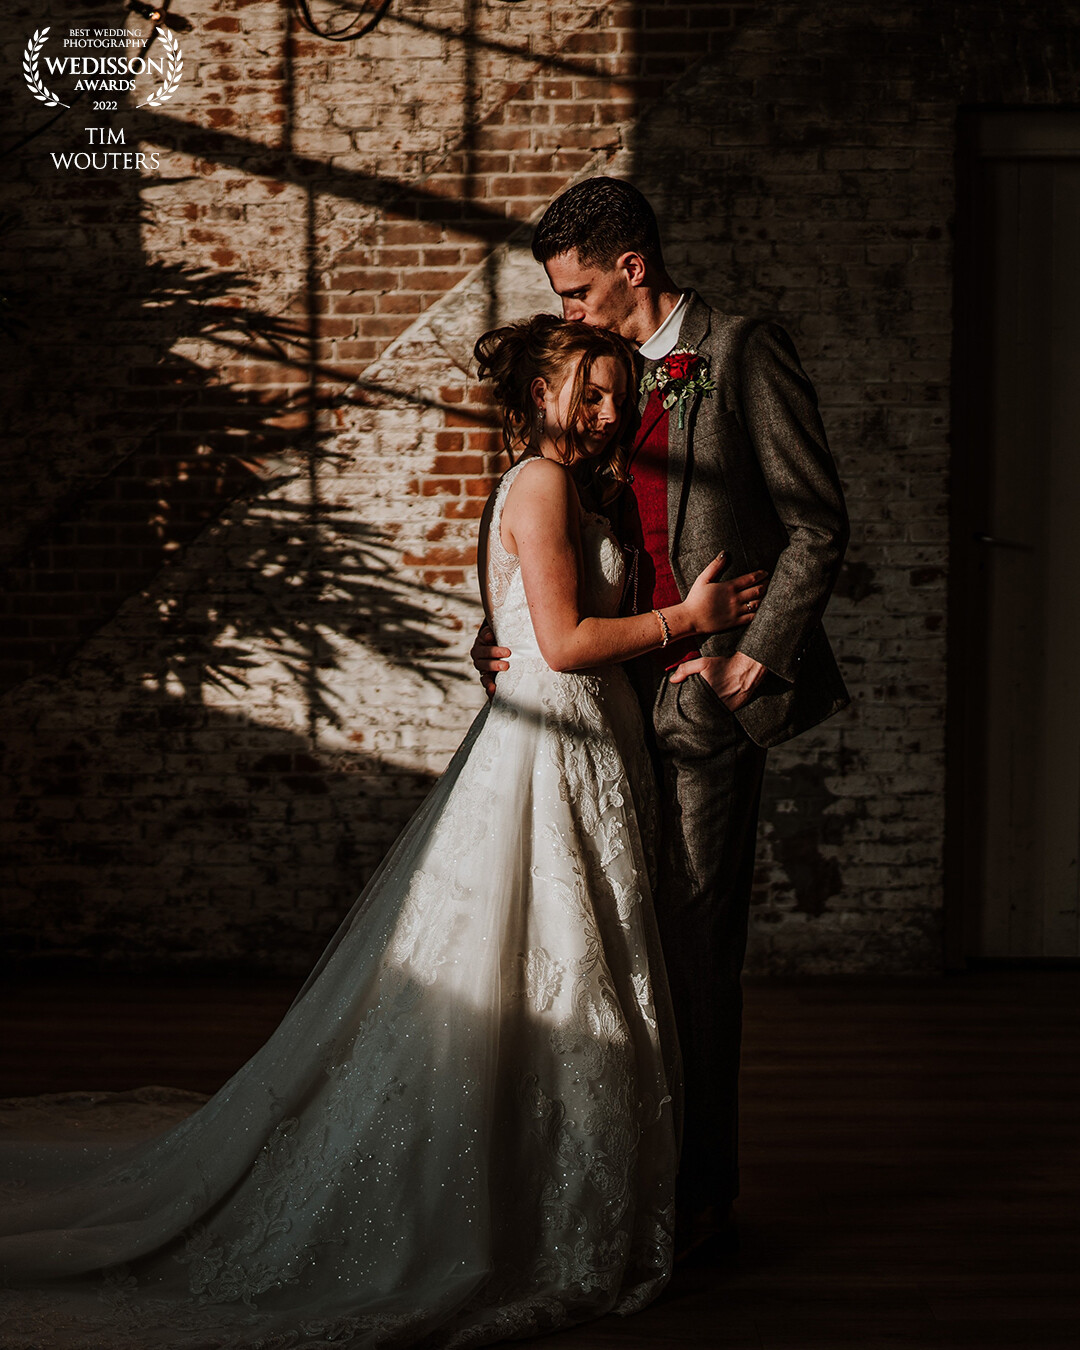 This Venue had Amazing light throughout the day. But when the sun got lower these really cool shadows caught my eye and we just knew this would be great on photo!